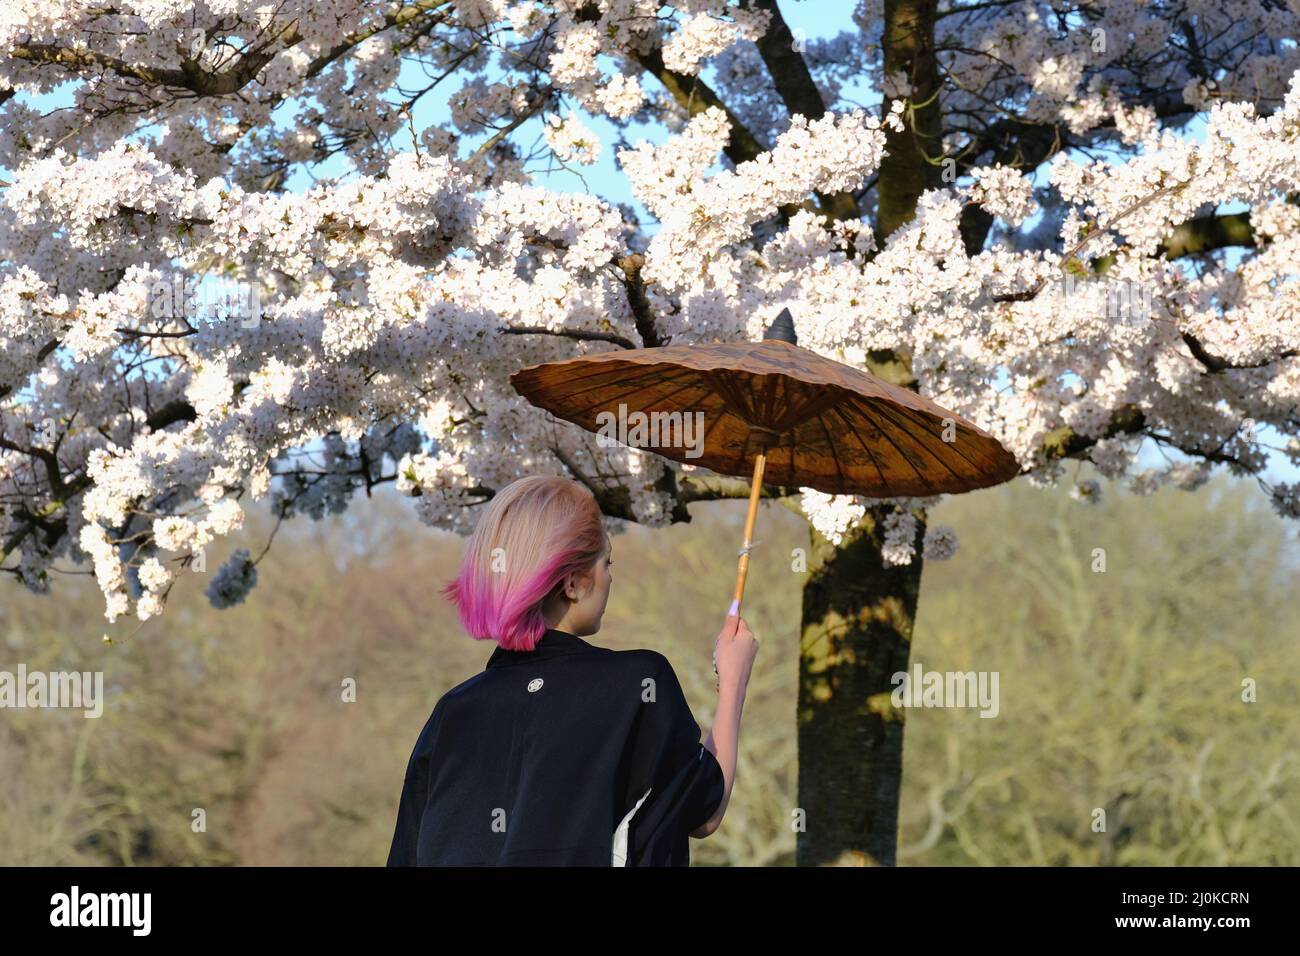 London, UK, 19th Mar, 2022. Visitors took photos and arranged photoshoots on a bright and sunny day as a cherry blossom-lined walk in Battersea Park came into bloom. Mainly East Asian people were visiting the area, with the blossom highly cherished across various countries, especially in Japan, where it is symbolic of spring and represents the fleeting nature of life as the flowers are short-lived. Credit: Eleventh Hour Photography/Alamy Live News Stock Photo